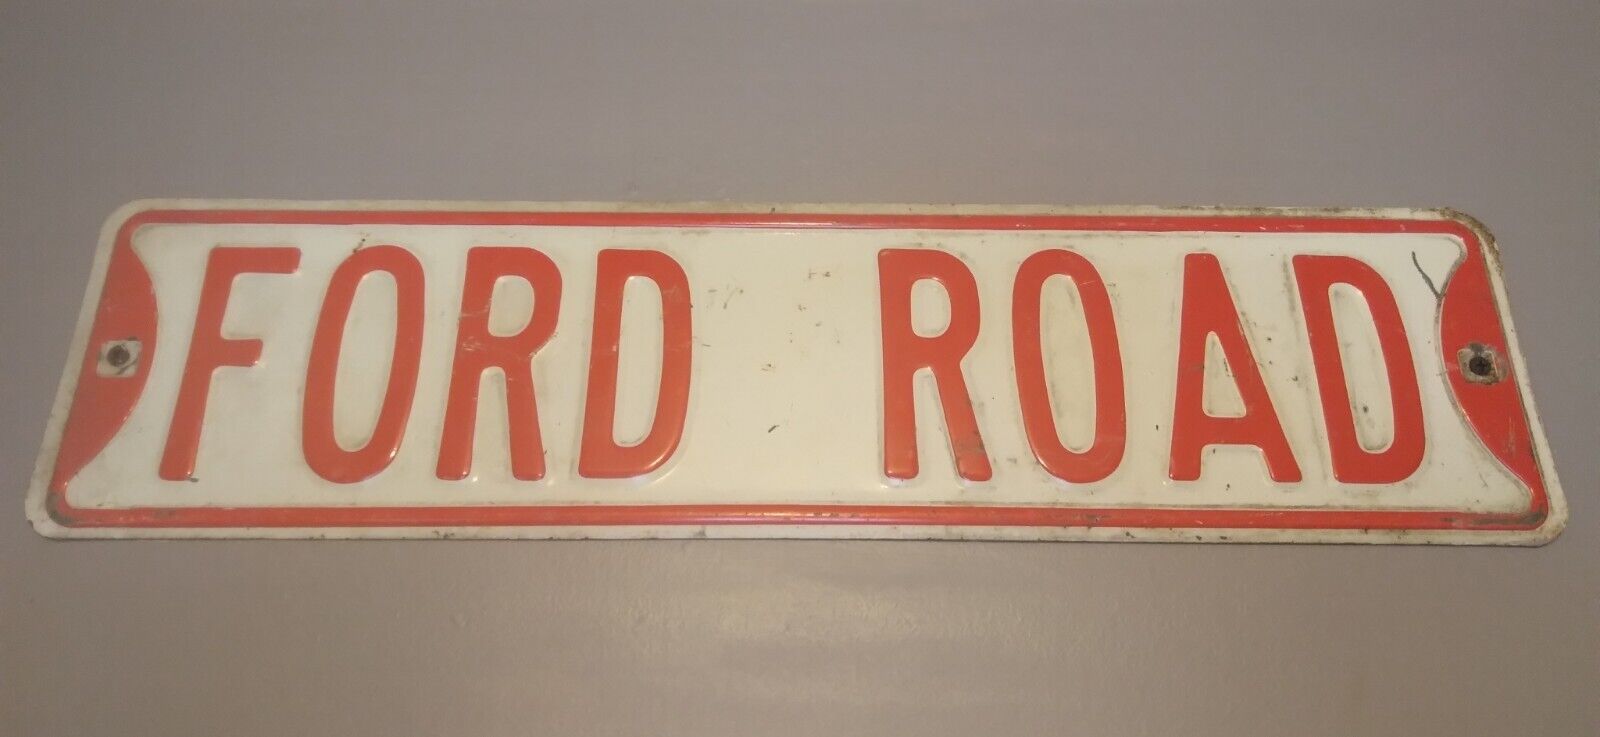 Vintage Florida Steel Street Sign - FORD ROAD Red & White 24x6